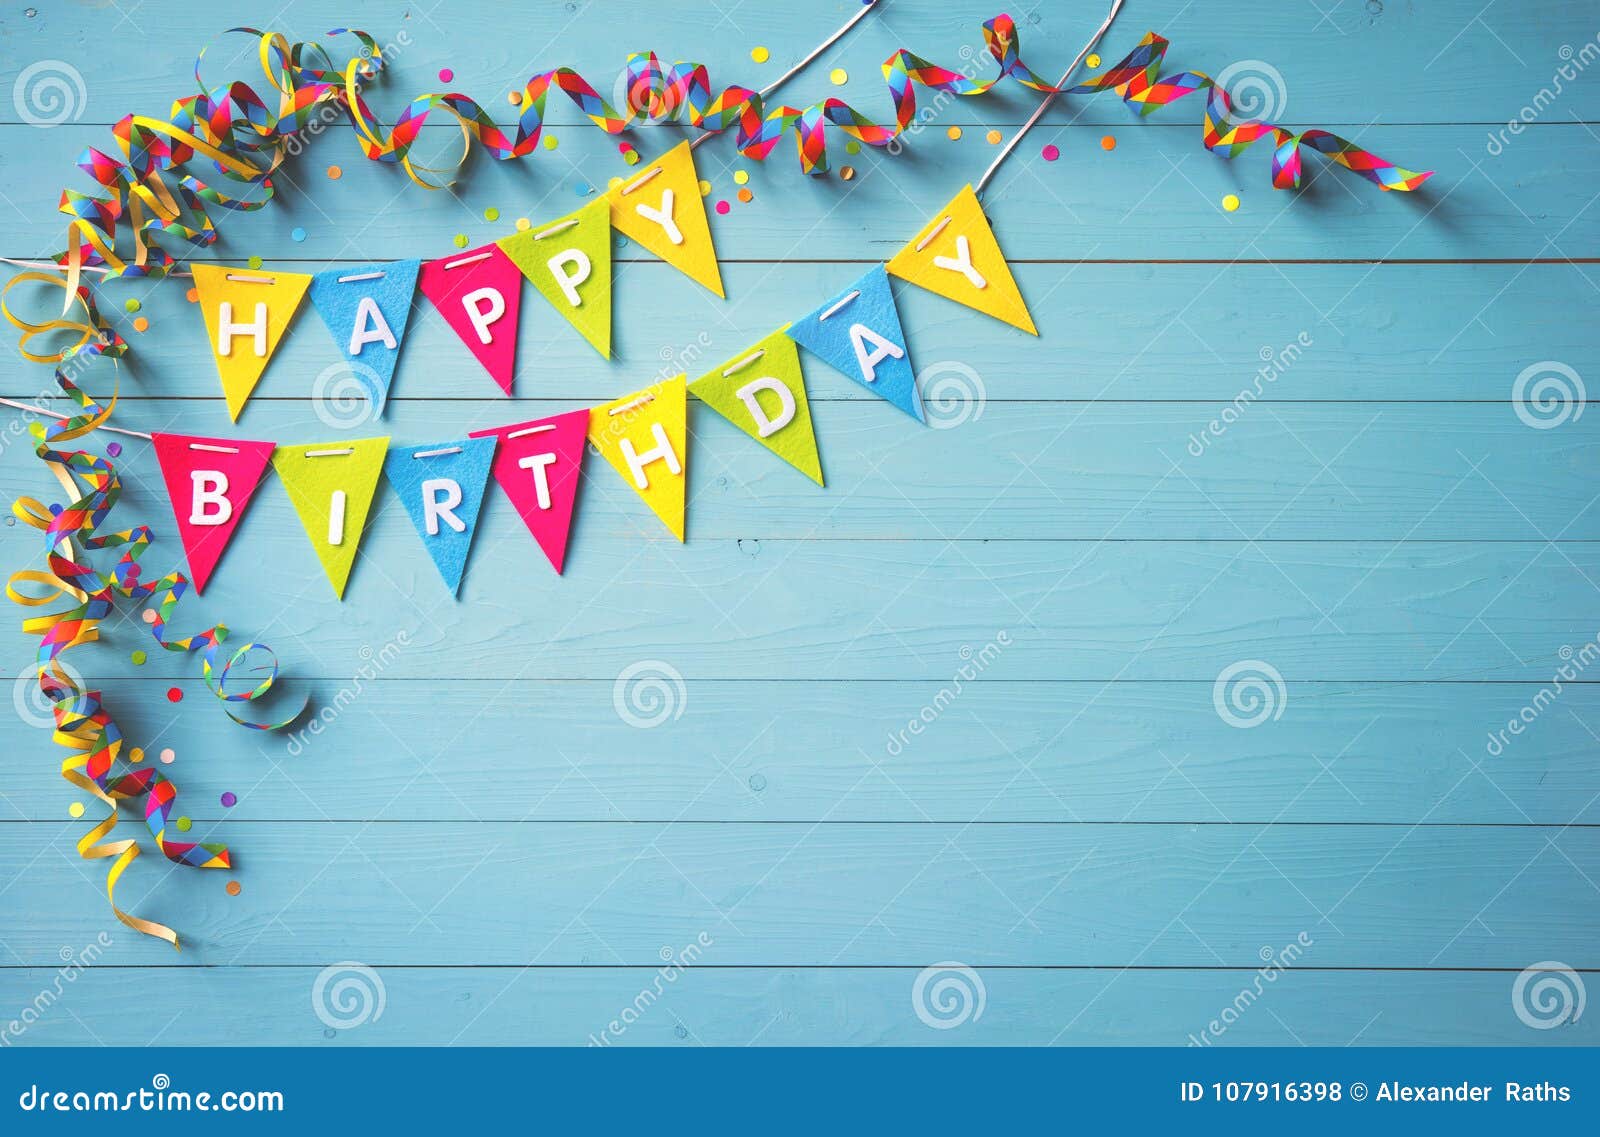 Happy Birthday Party Background with Text and Colorful Tools Stock Photo -  Image of birthday, children: 107916398